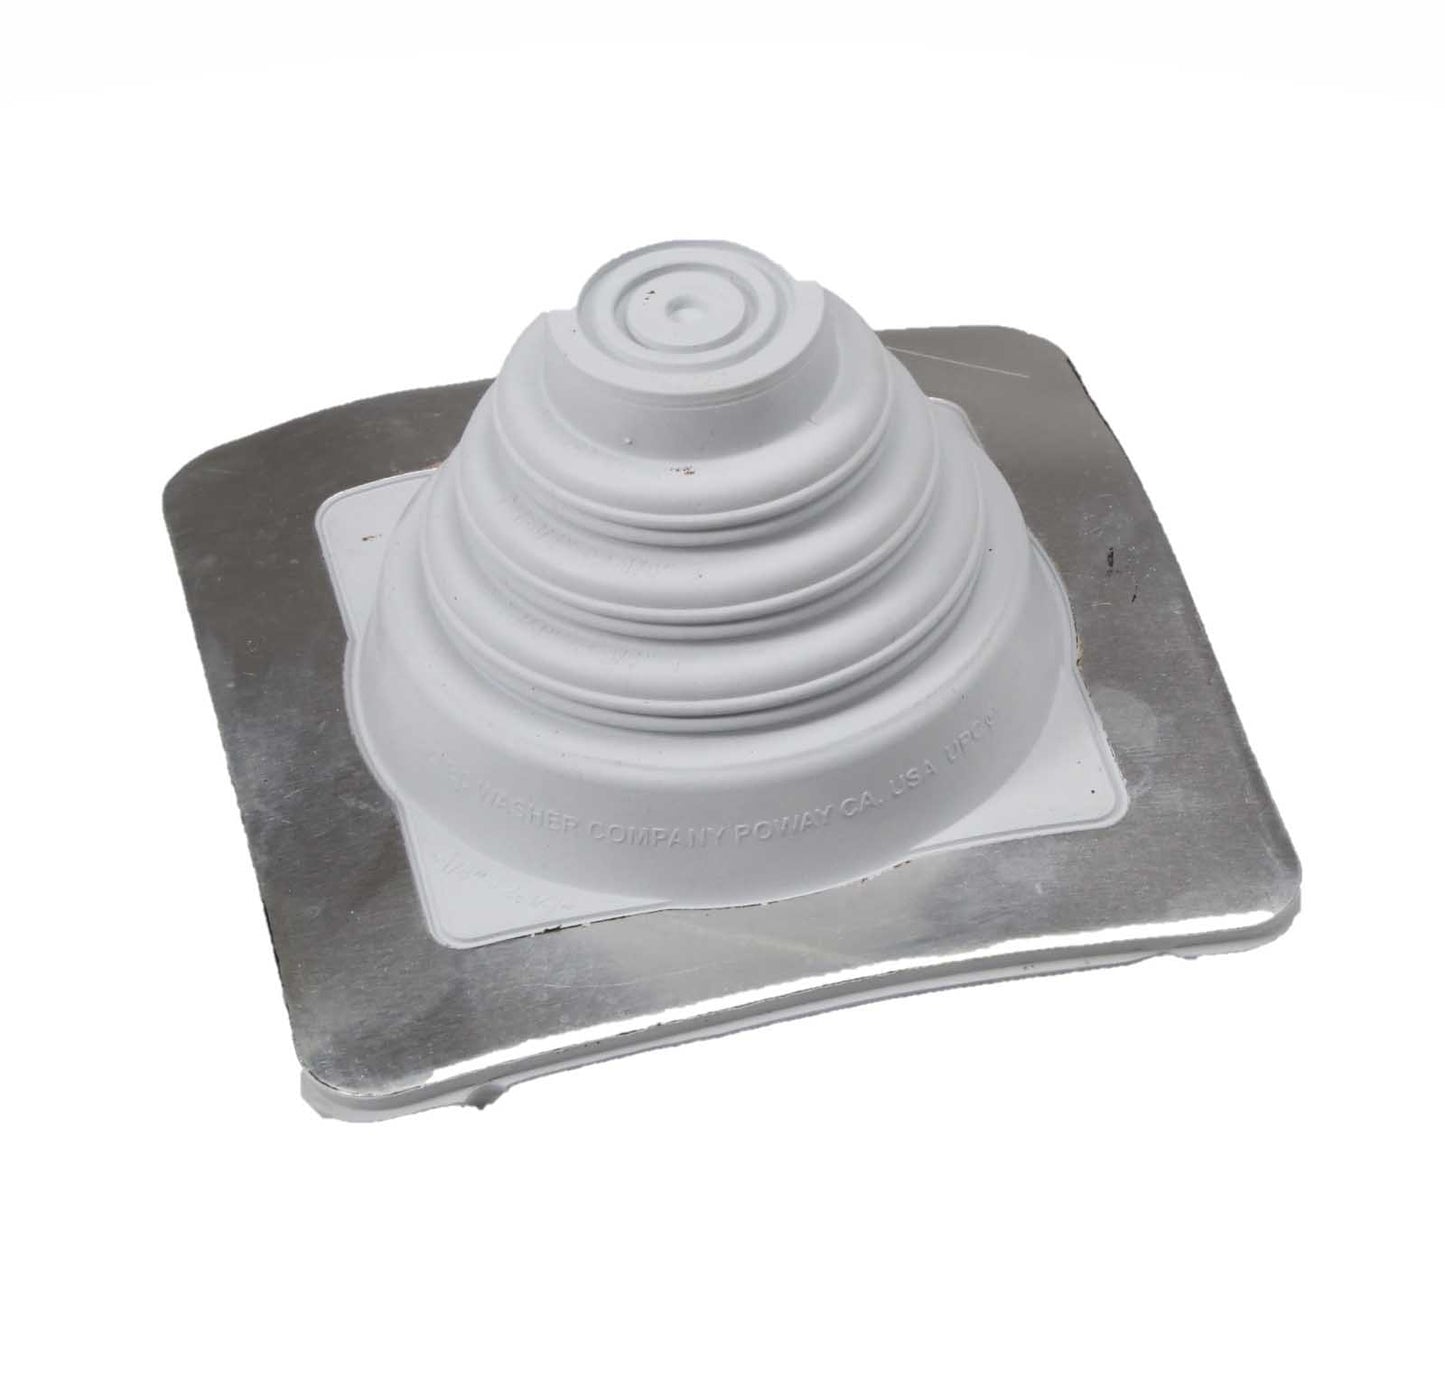 #1 Roofjack Square EPDM Pipe Flashing Boot Gray